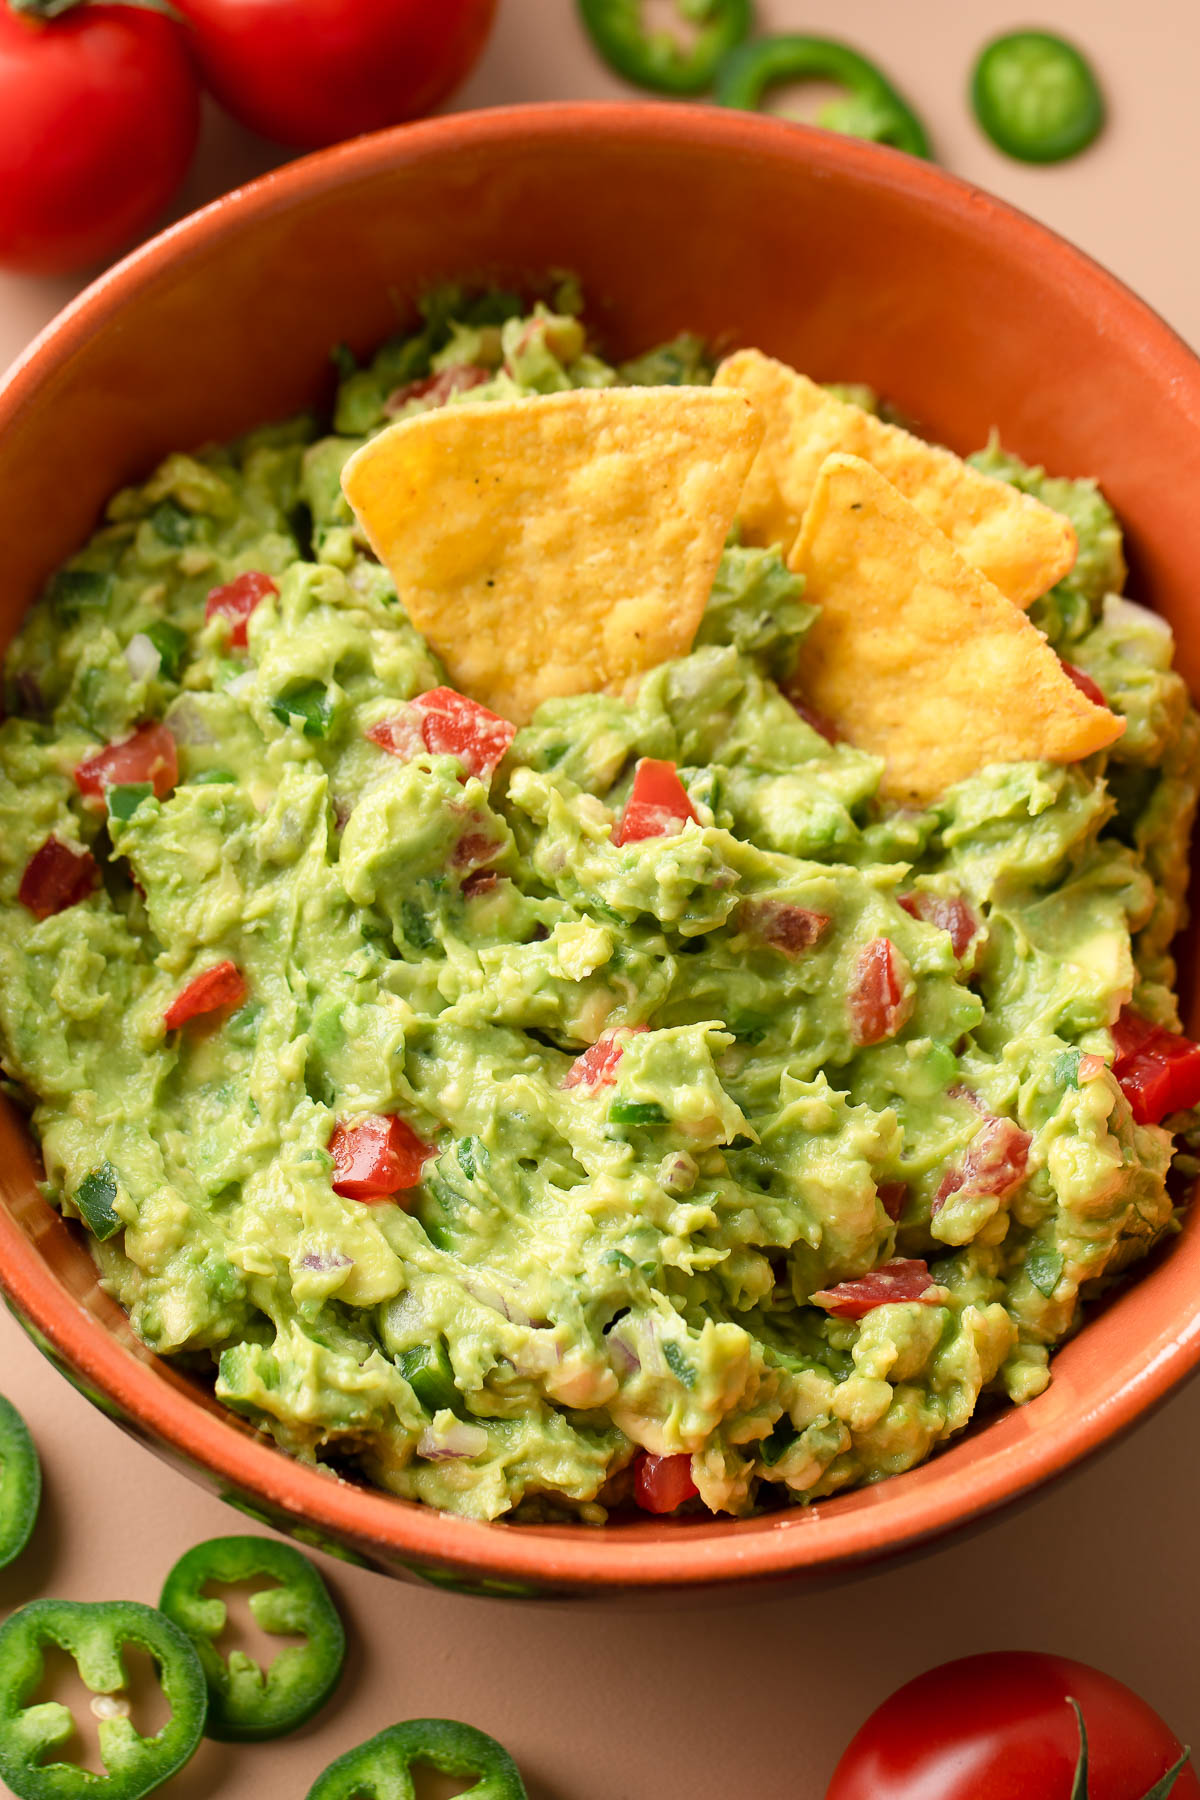 Chunky Guacamole with Tortilla Chips